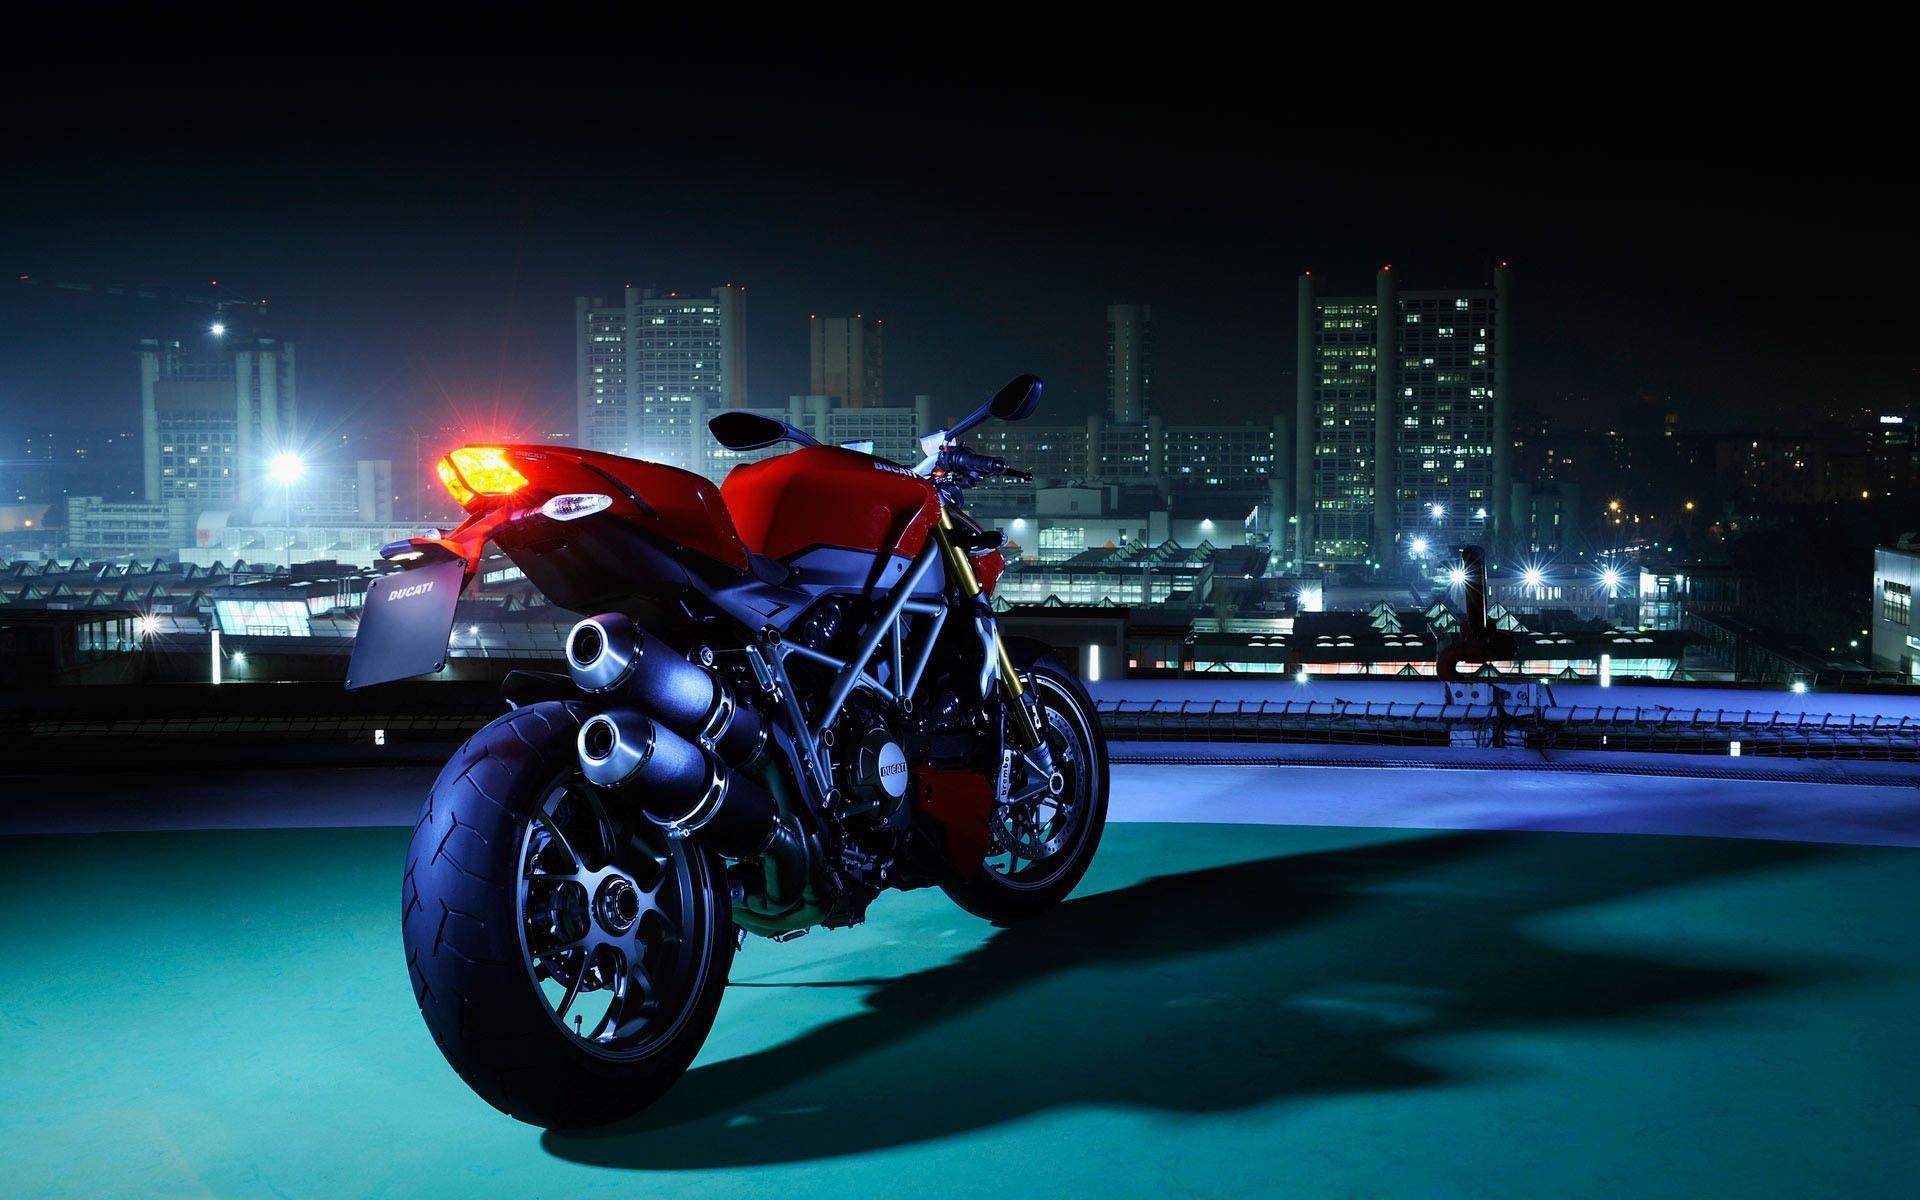 Ducati Monster wallpaper and image, picture, photo